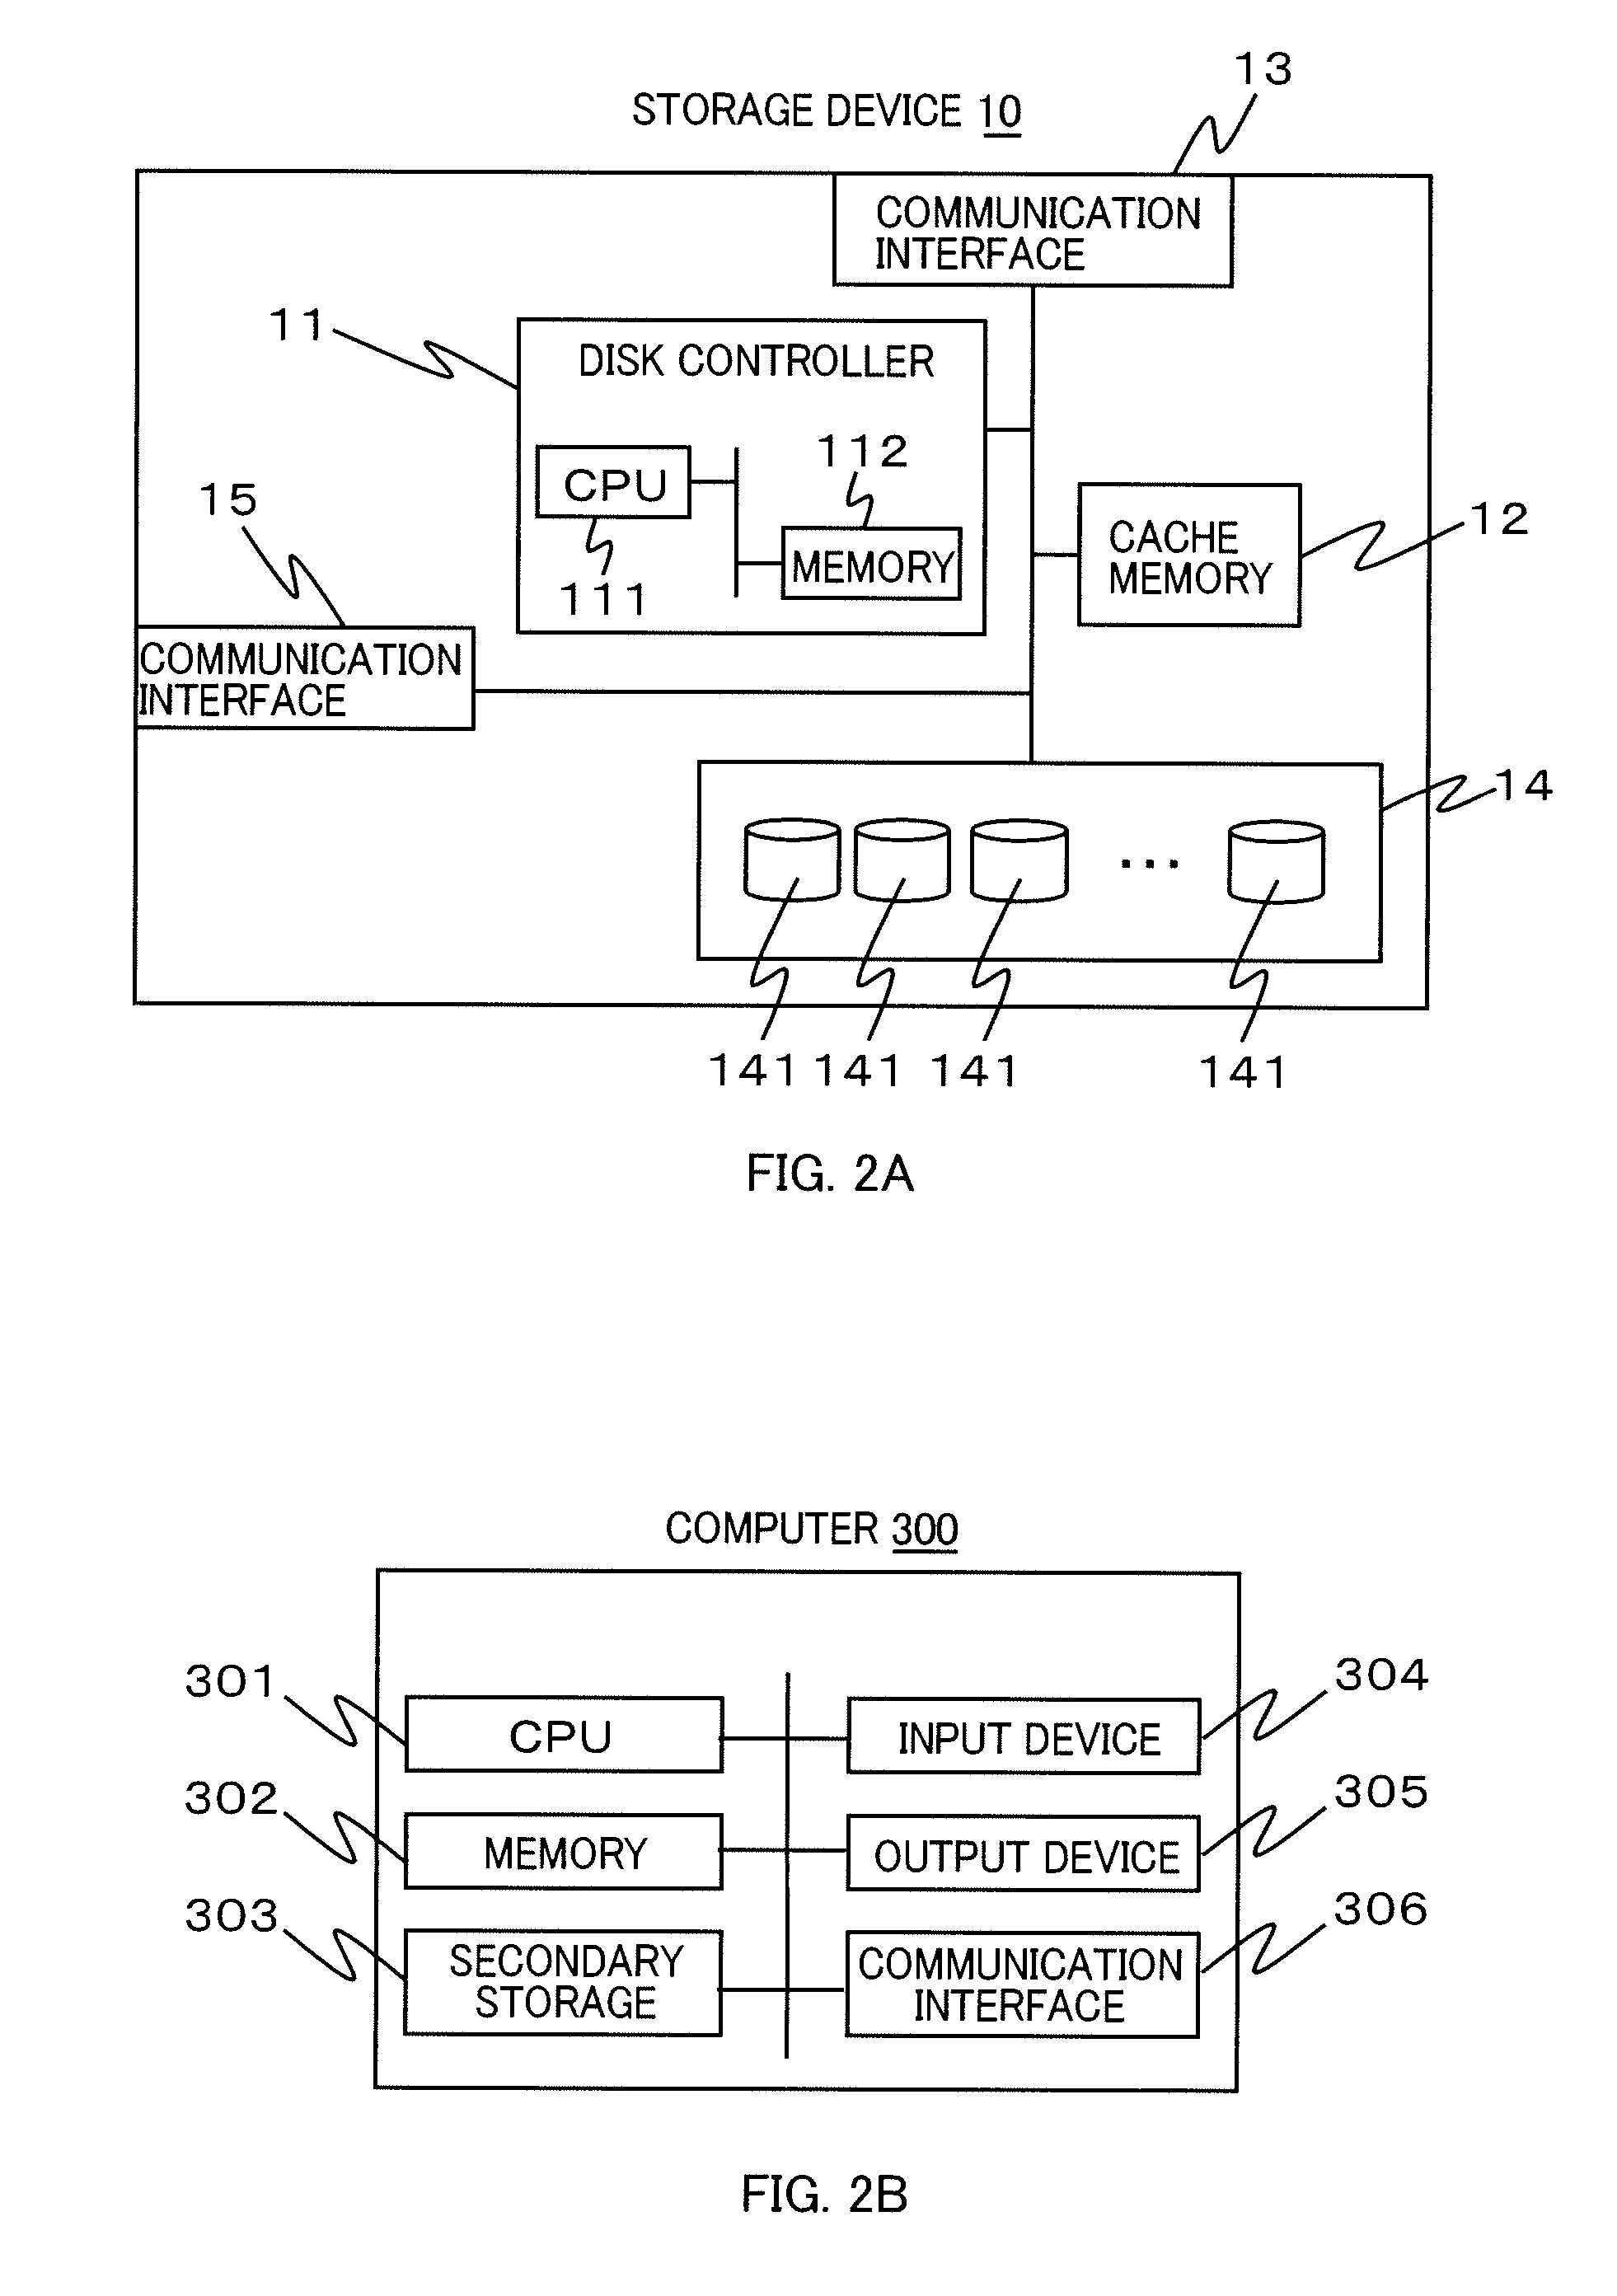 Management device for storage device